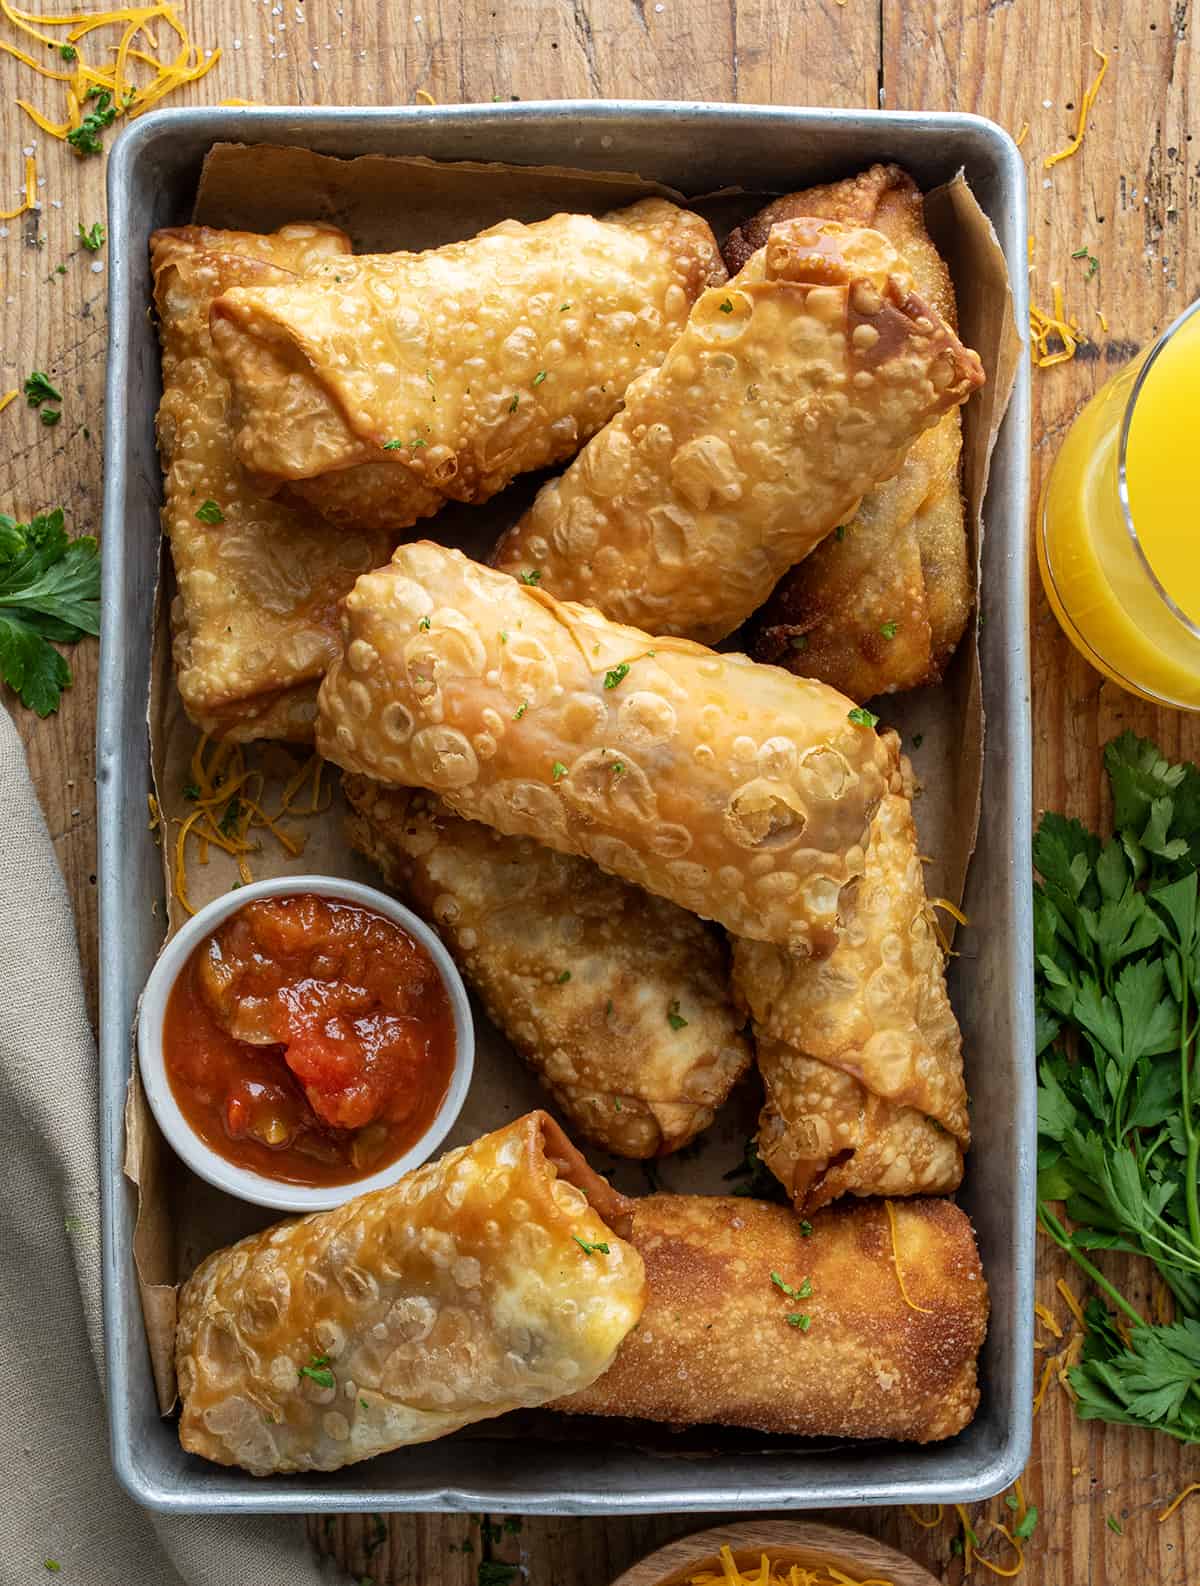 Steak Egg and Cheese Egg Rolls in a Pan with Salsa on a Wooden Table with Orange Juice from Overhead.